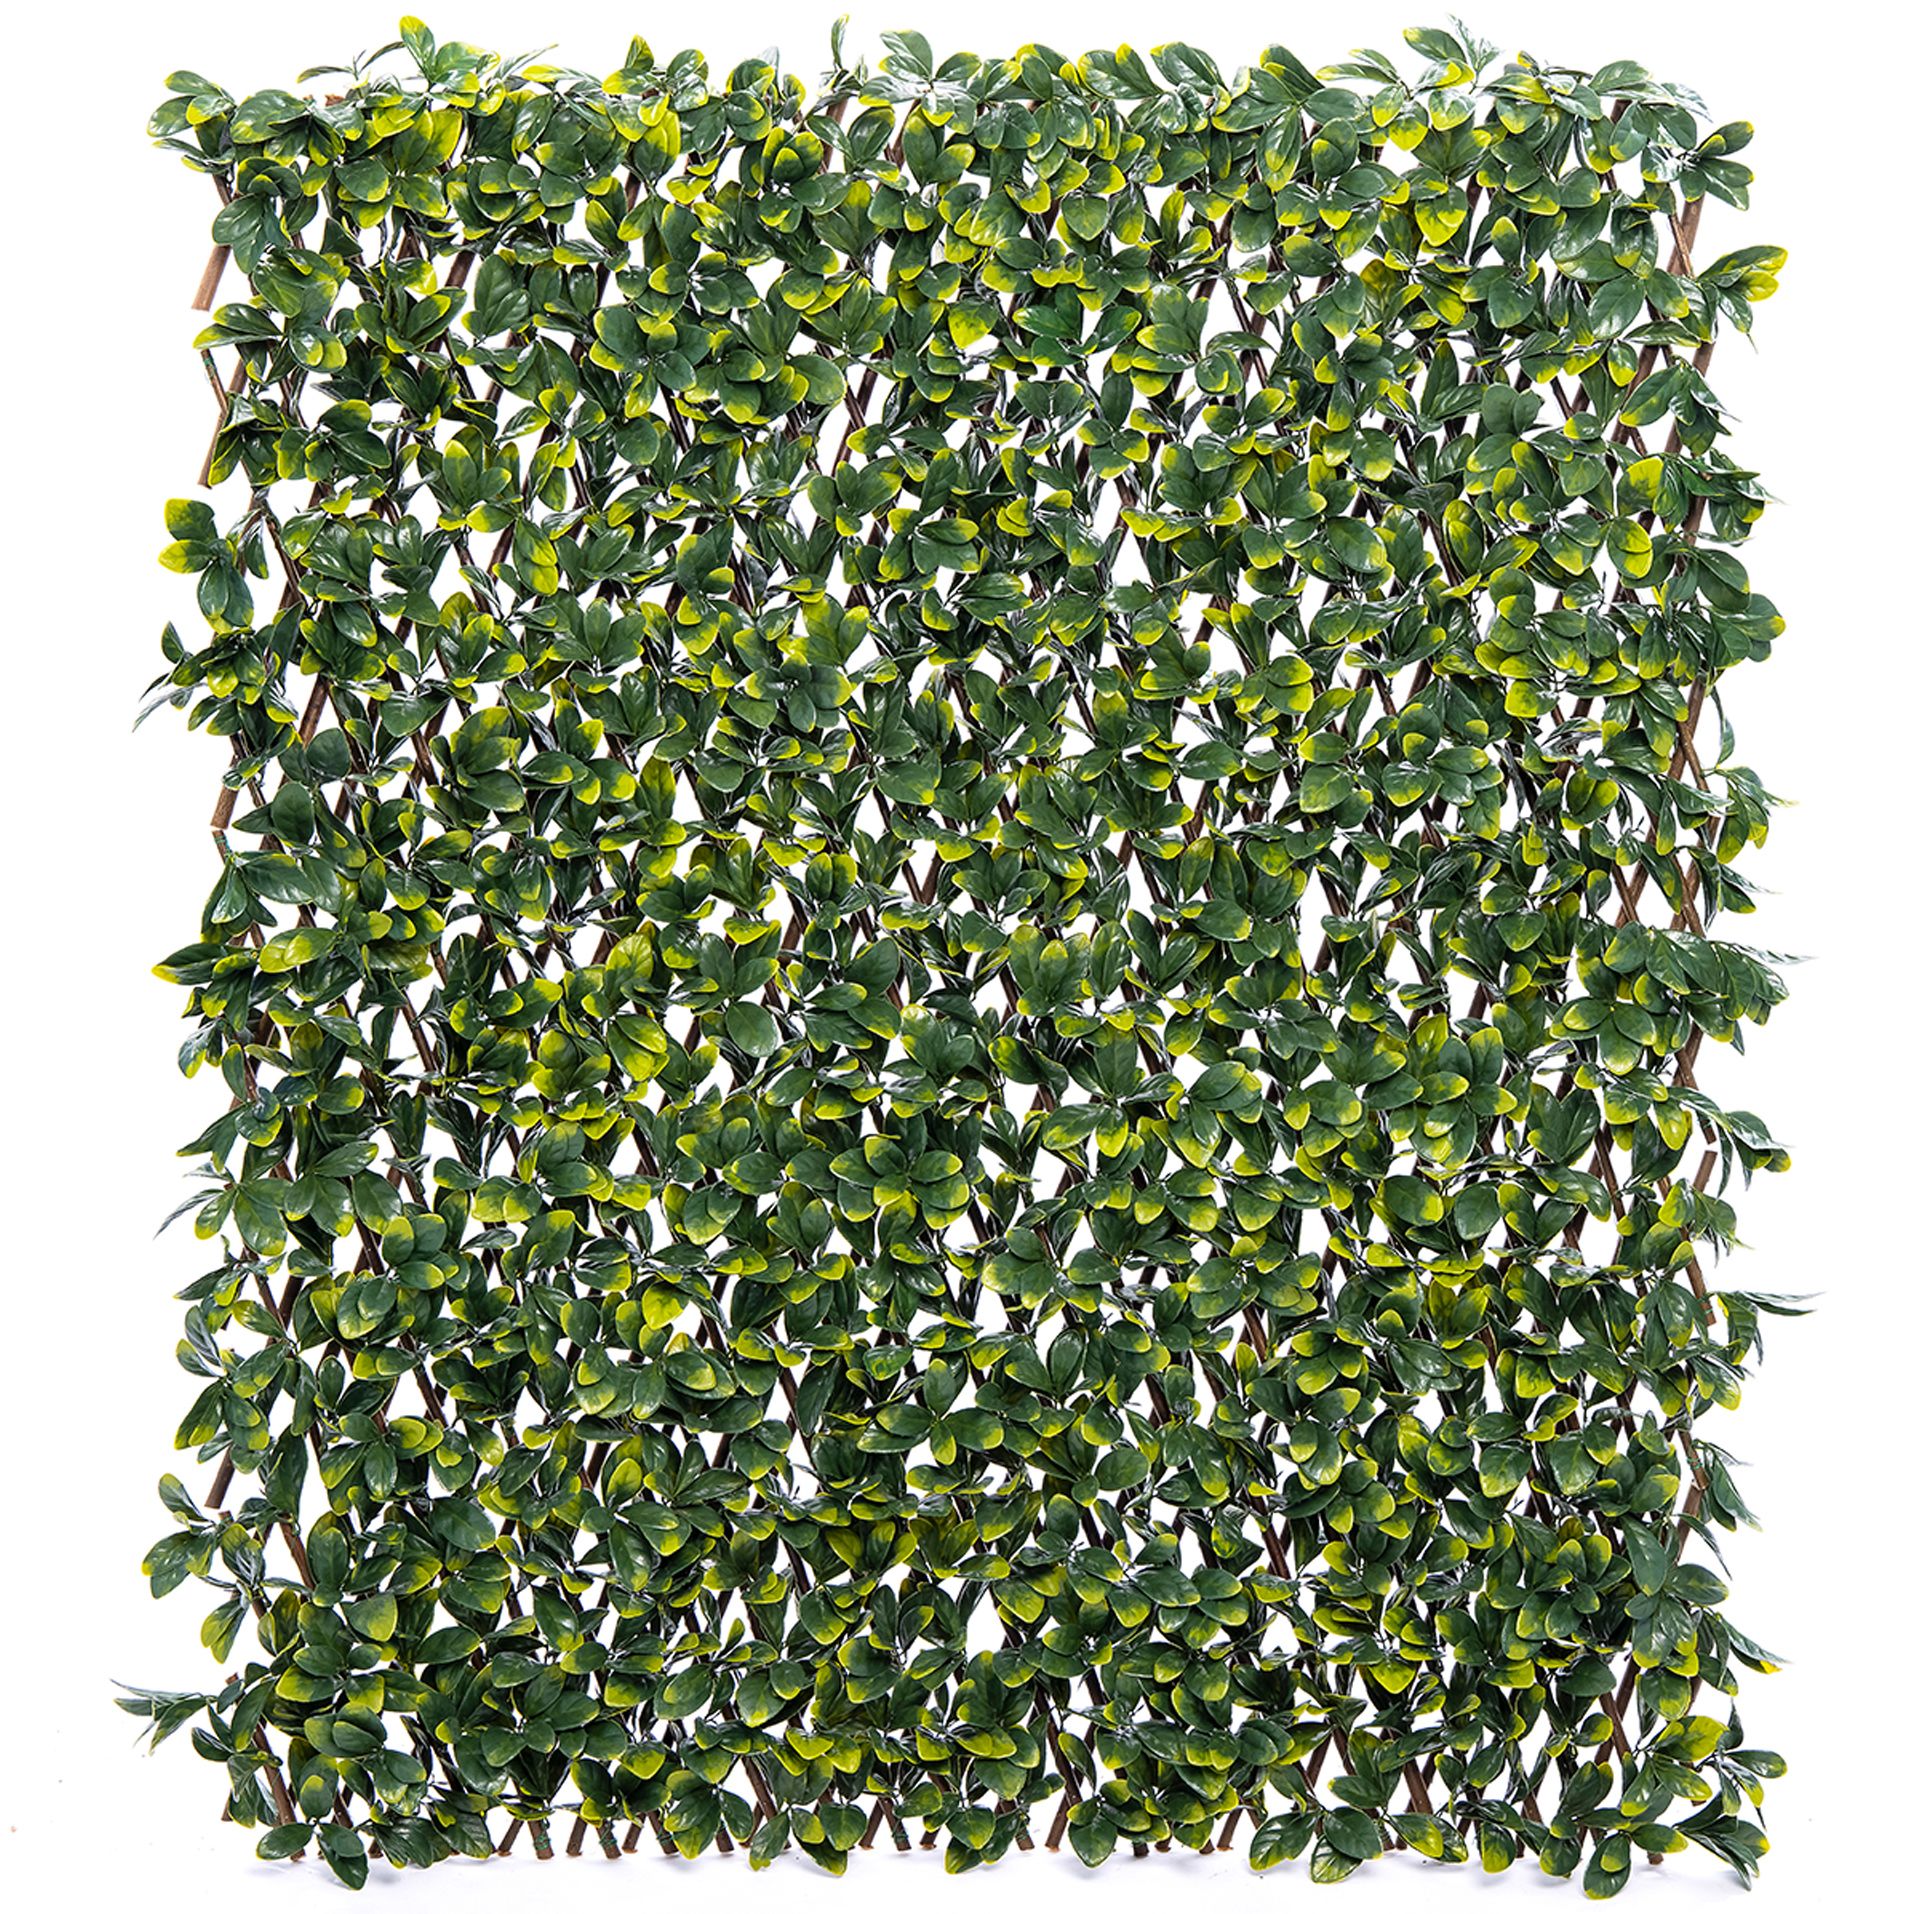 Klikstrom Extensible fence with Bayberry leaves Square Artificial plant wall, (H)1m (W)2m